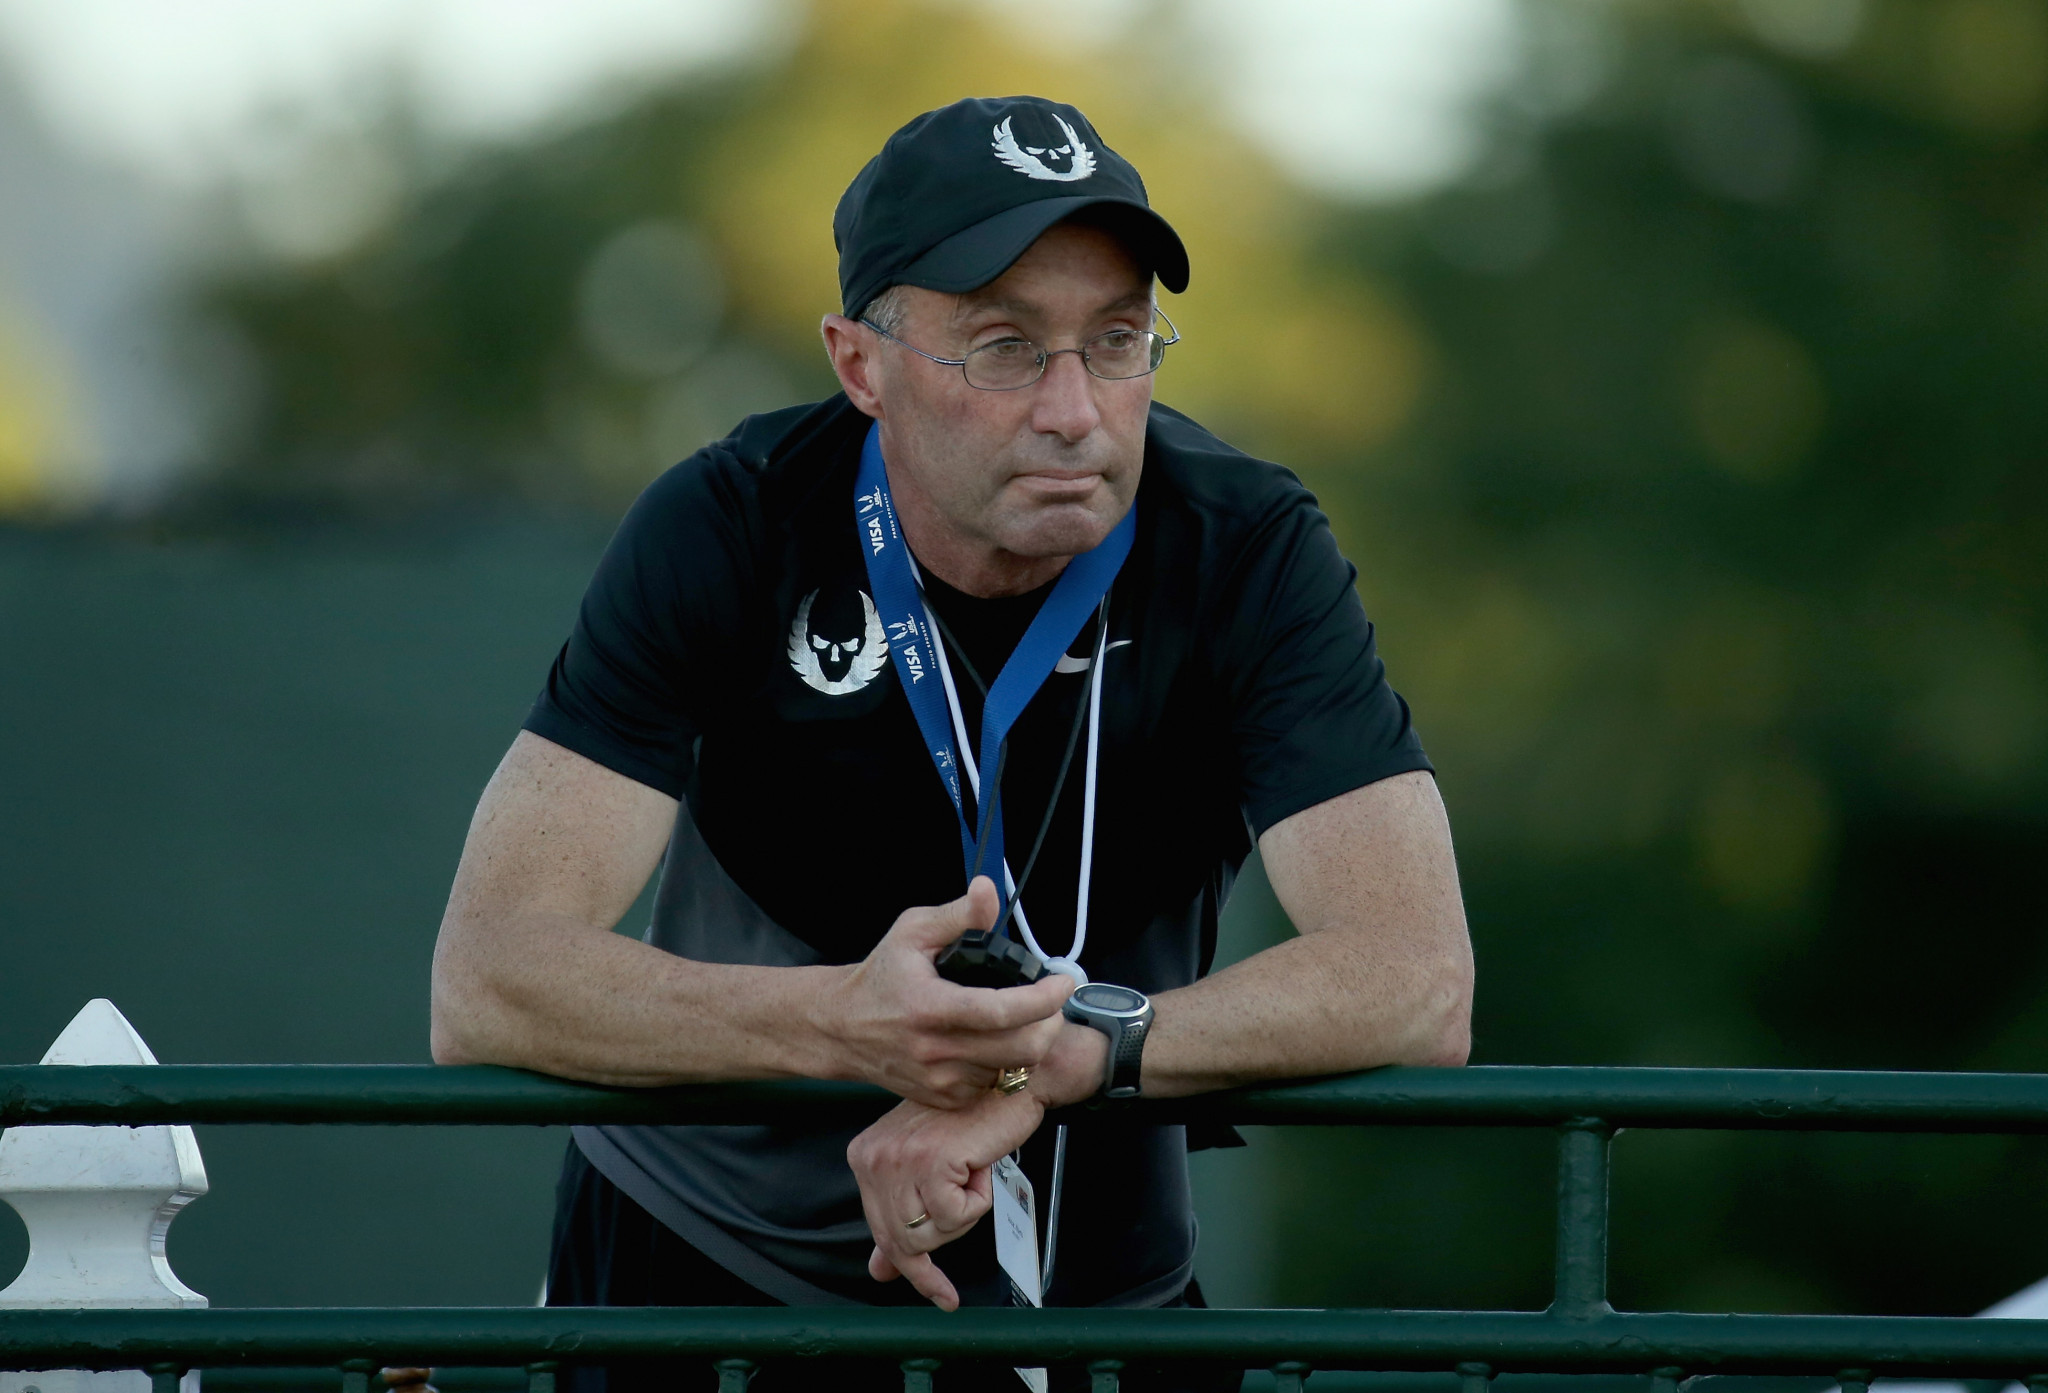 UK Athletics give 2015 review on Salazar to UKAD after repeated requests